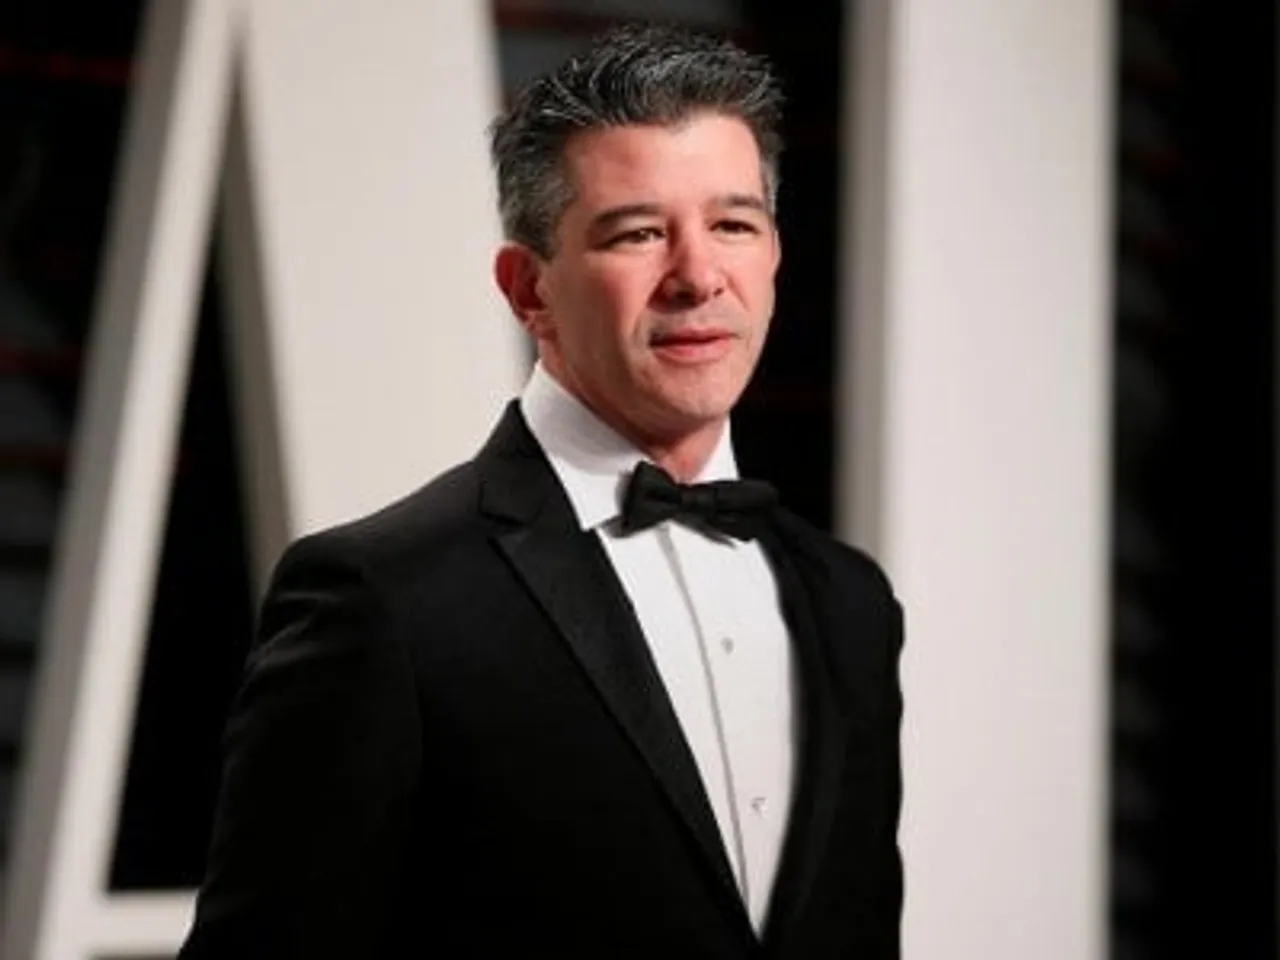 Uber CEO Travis Kalanick hires CEO advisory firm Teneo to improve his image